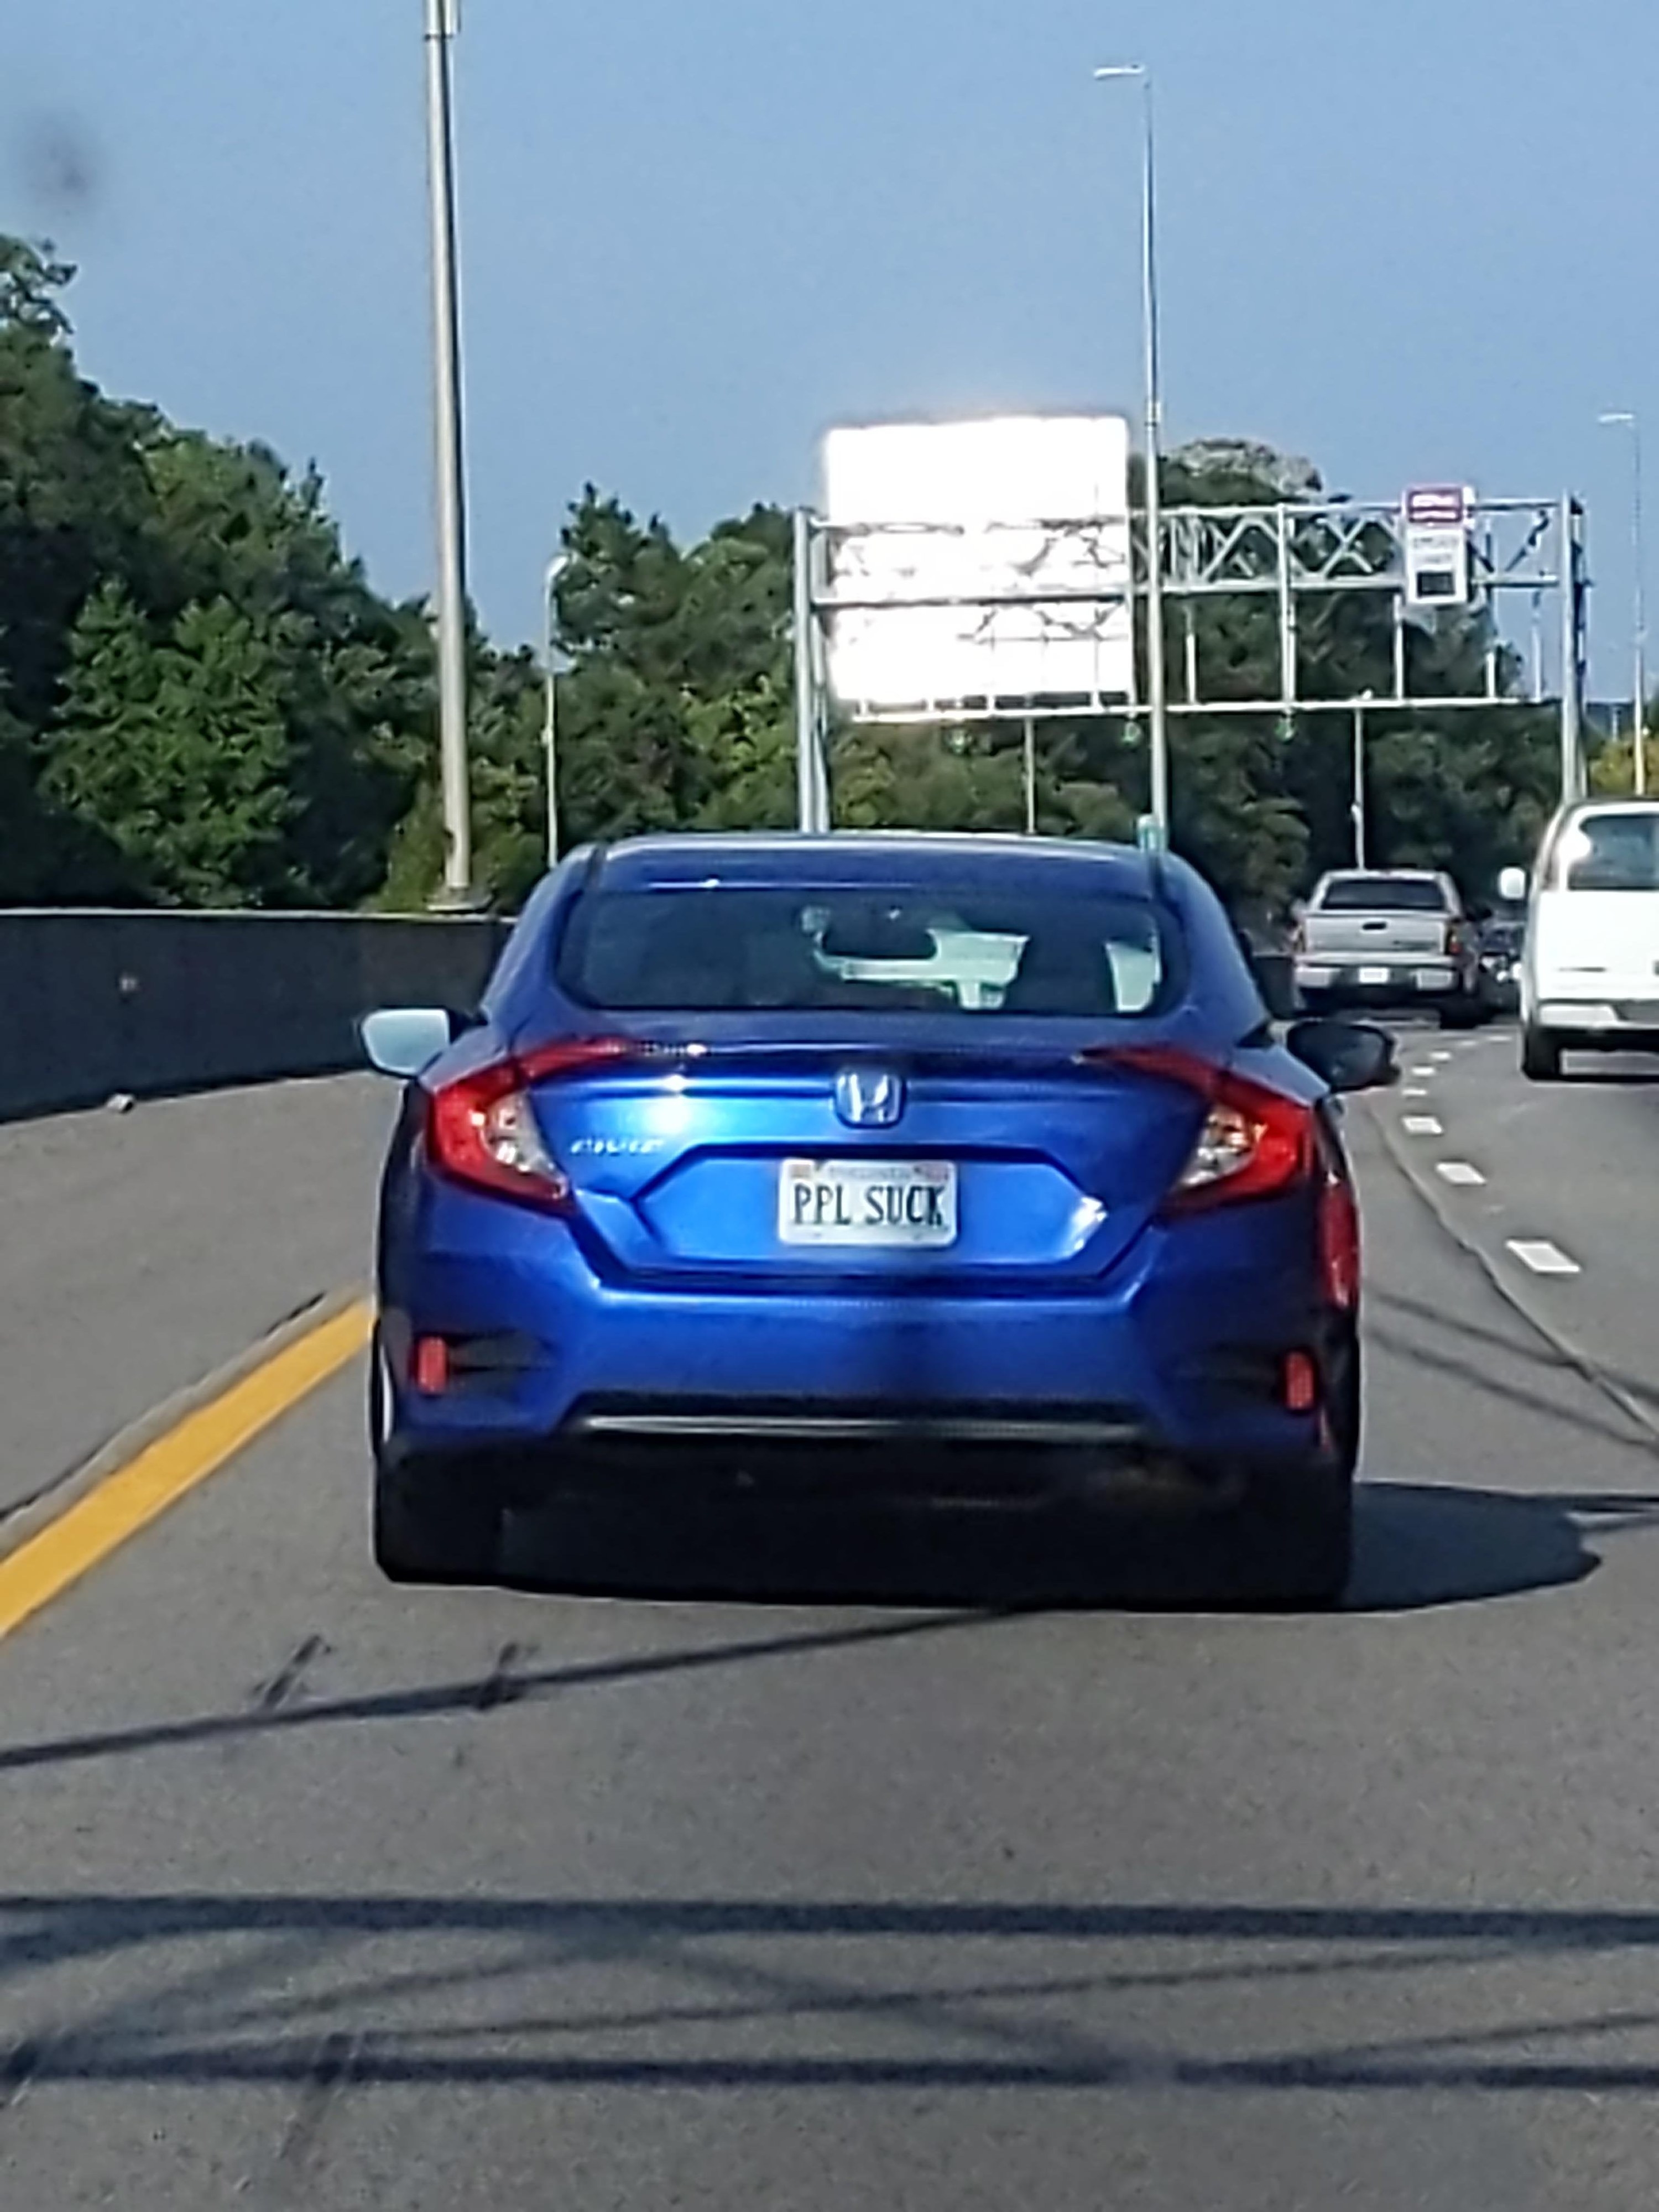 Car with license plate reading &quot;PPL SUCK&quot;